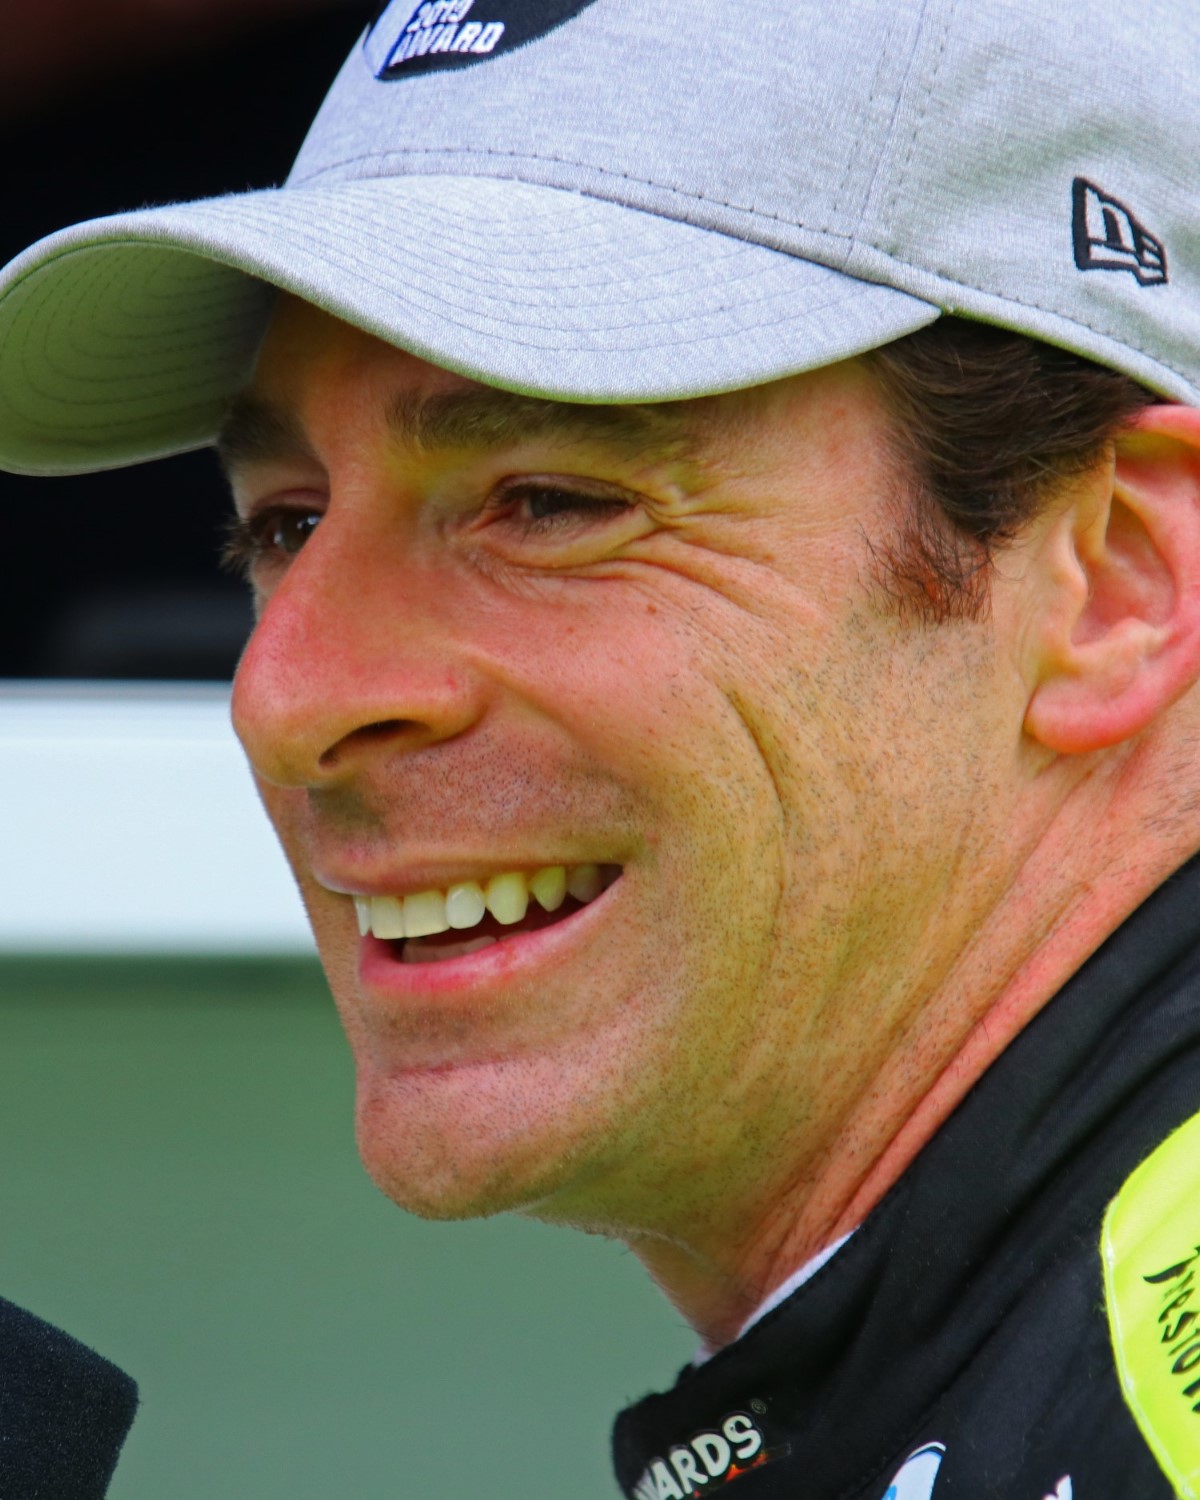 Simon Pagenaud, the 2nd Penske driver with a chance for the title, but it will be hard